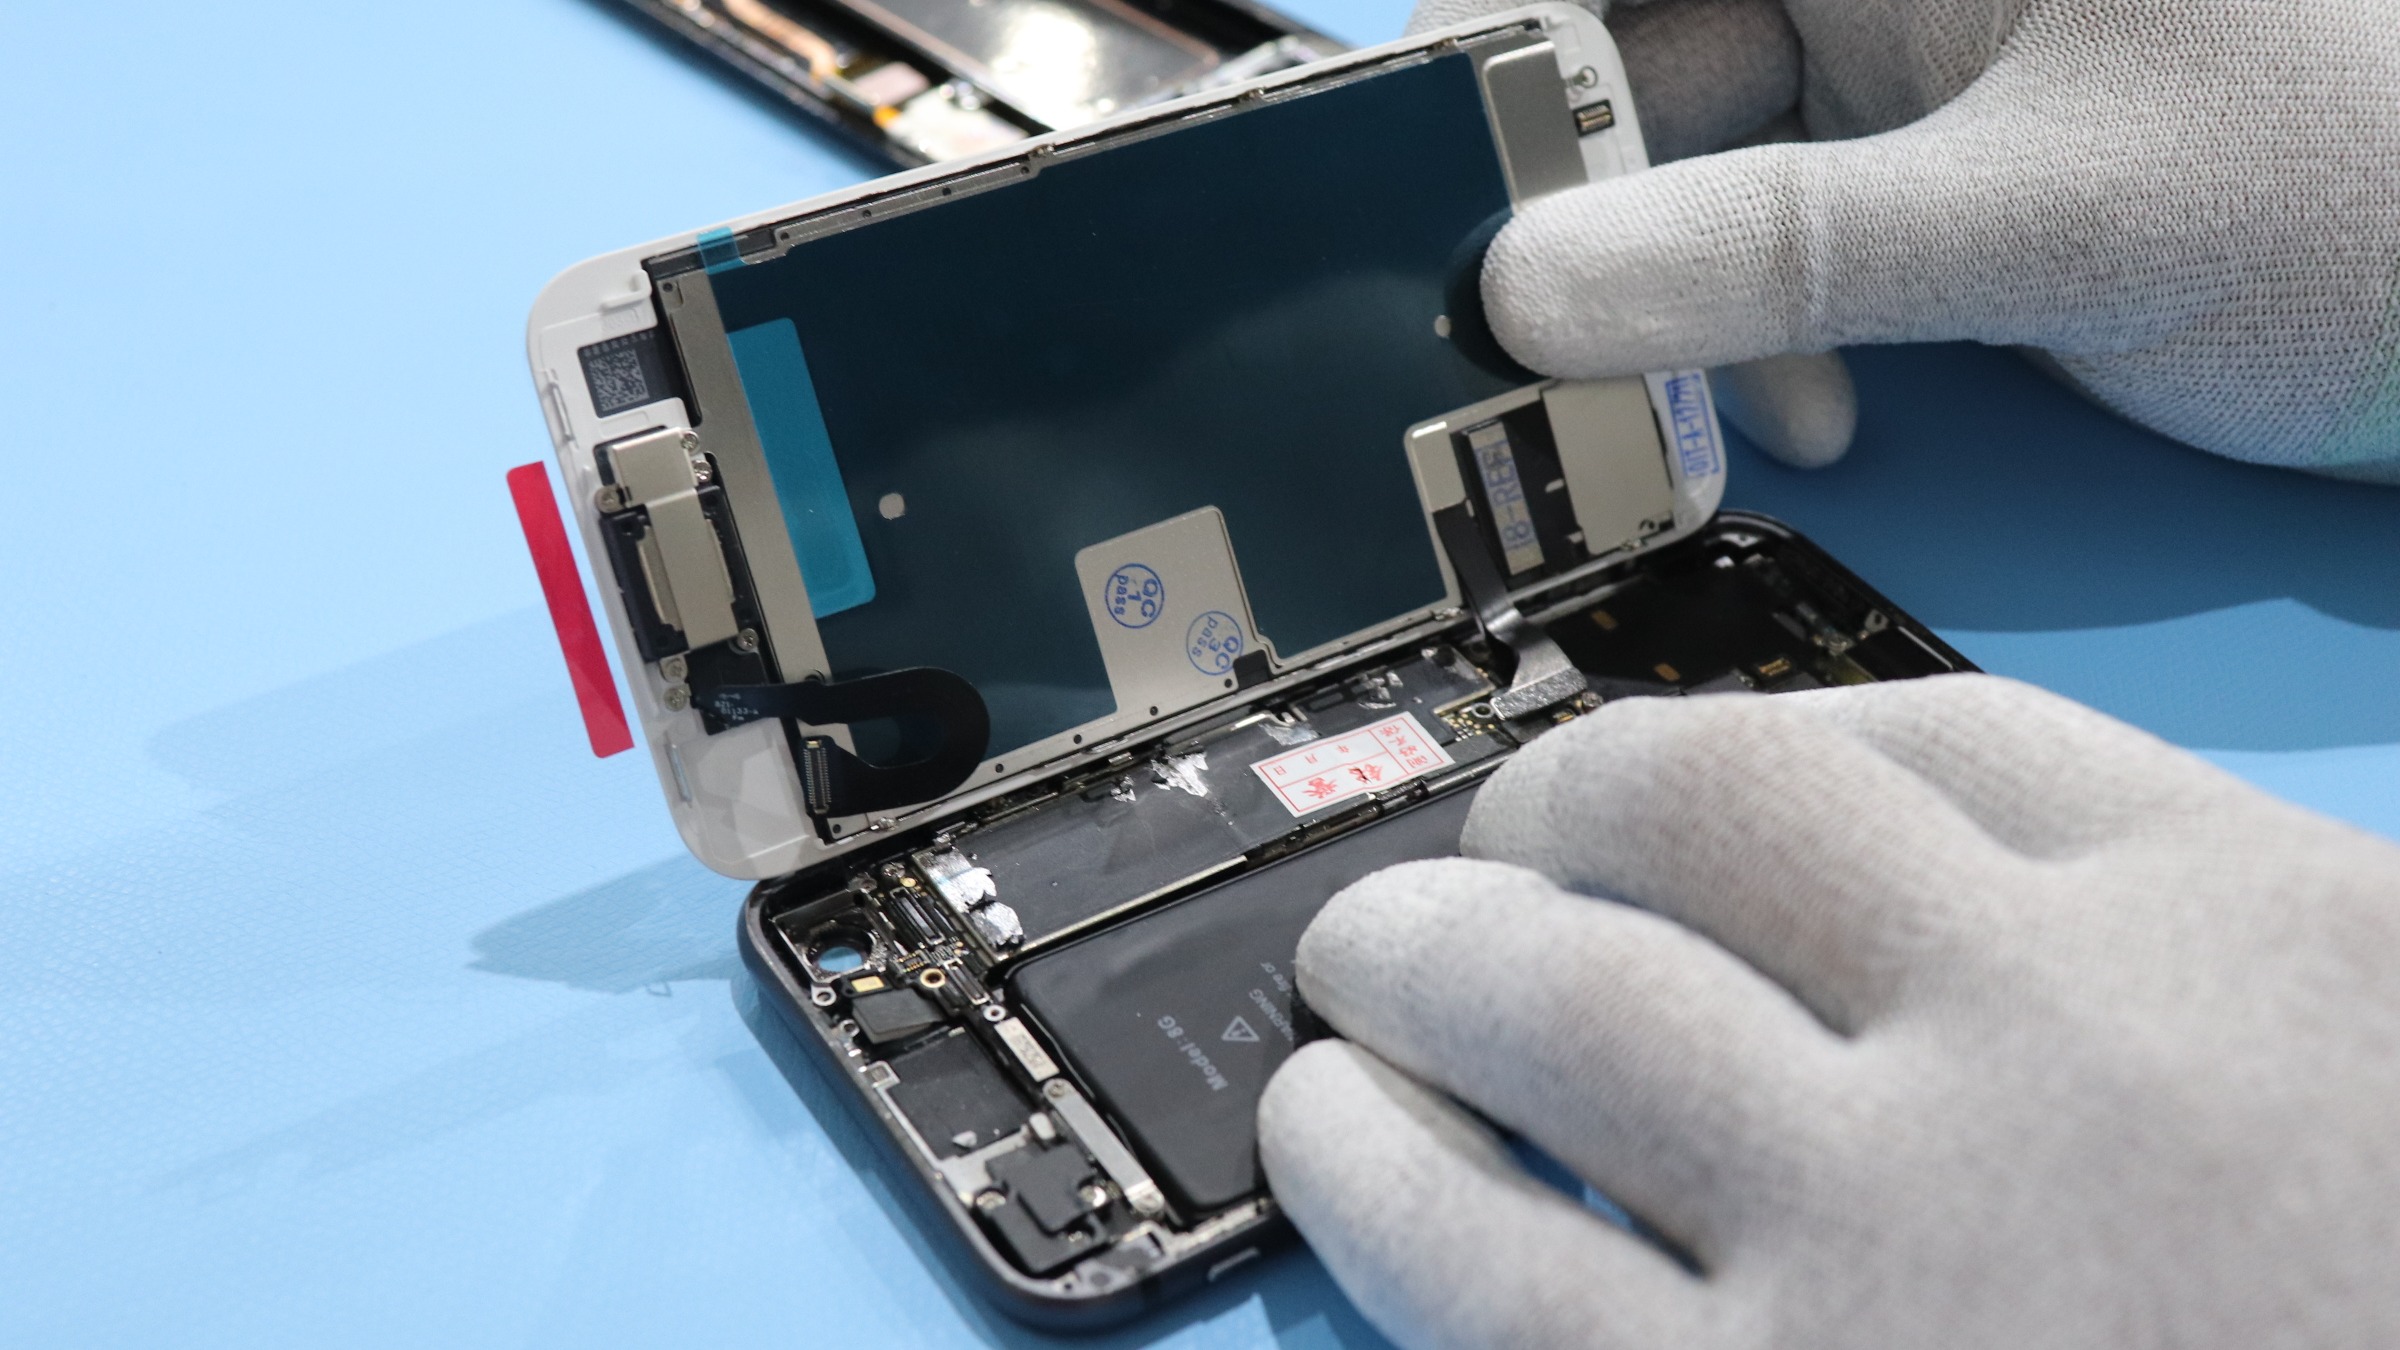  5 Essential Tips for Mobile Repairs - Avoid Mistakes and Repair Smart